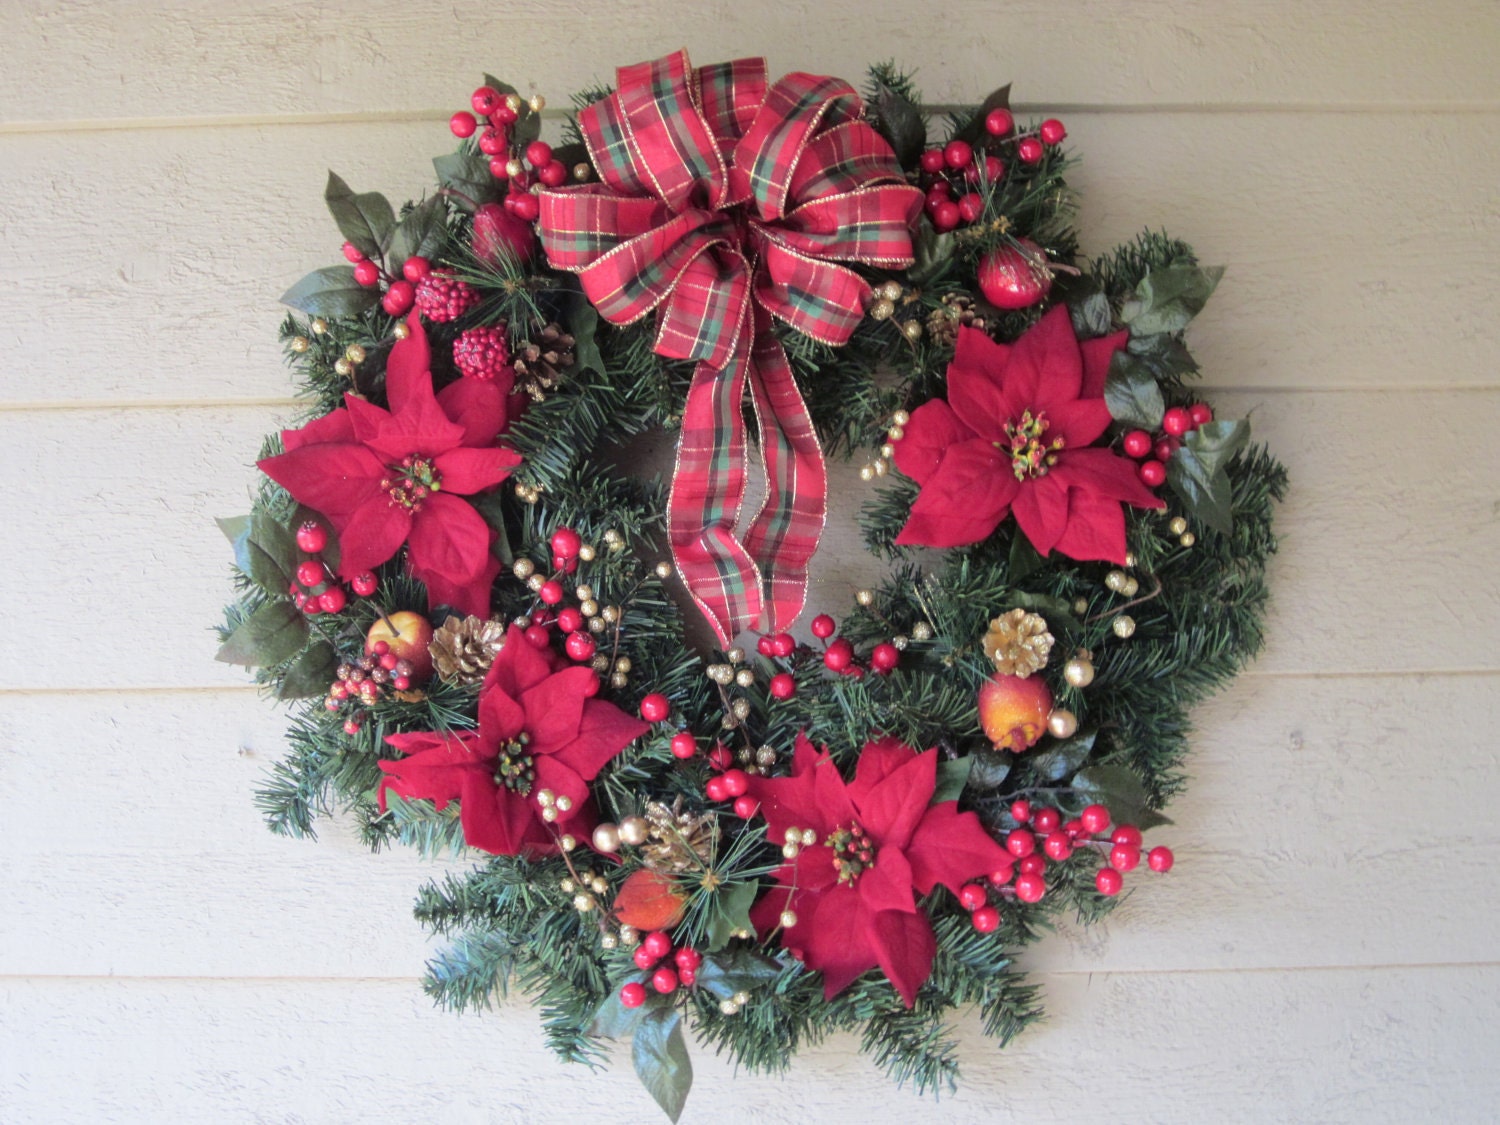 Traditional Holiday Wreath with Plaid Tartan Bow and Poinsettias